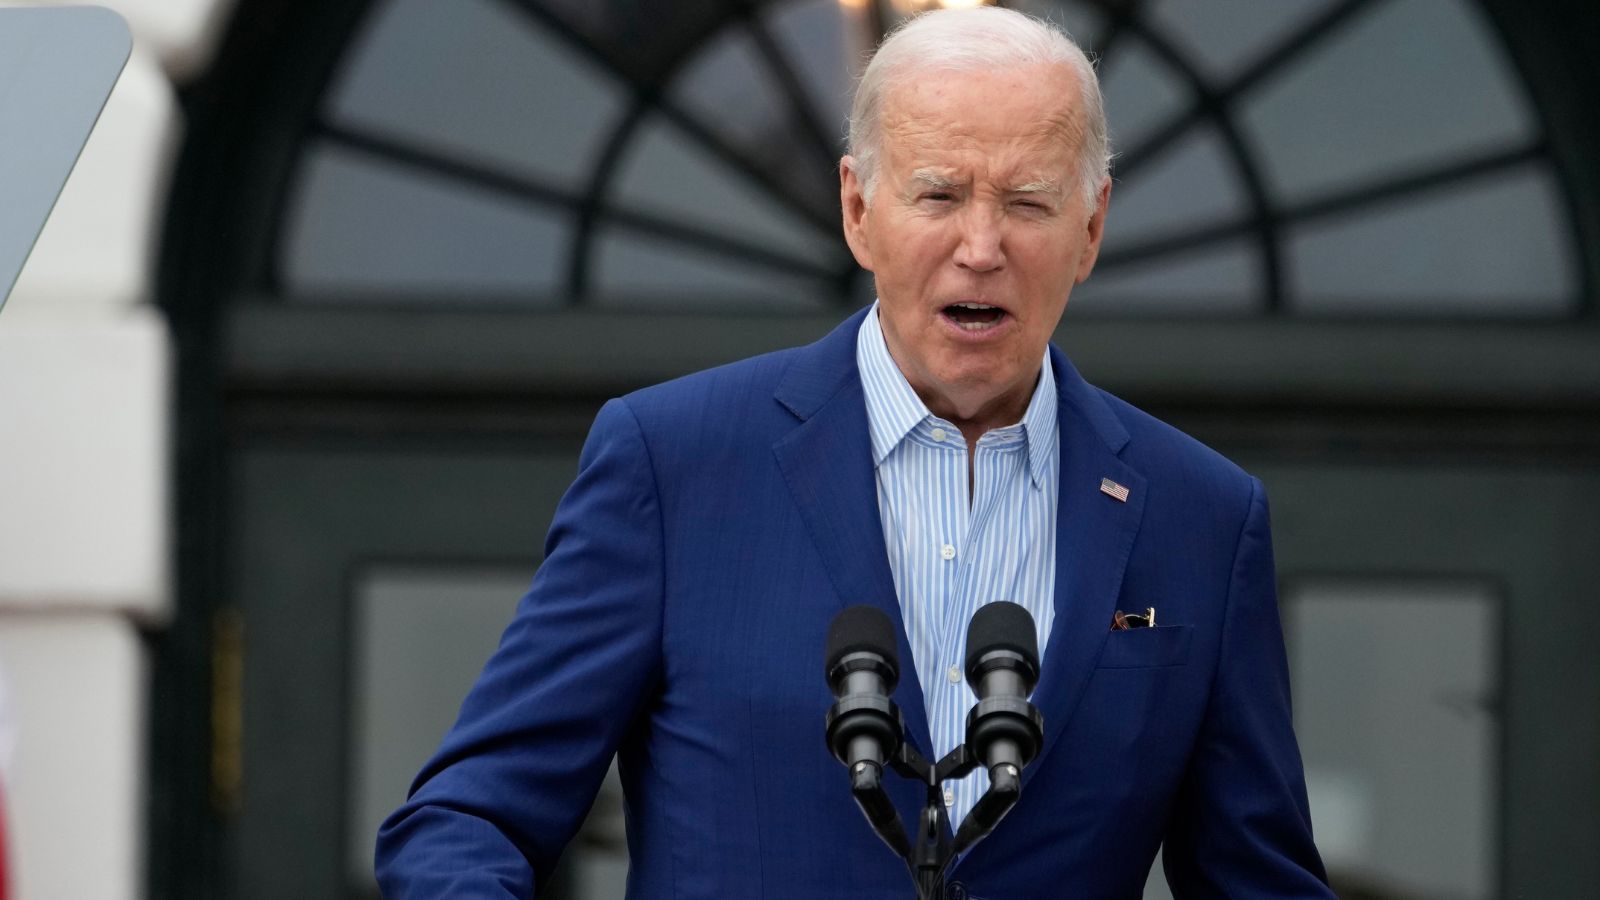 Biden Administration Considers Asylum Restrictions Amid Surge in Migrant Arrivals